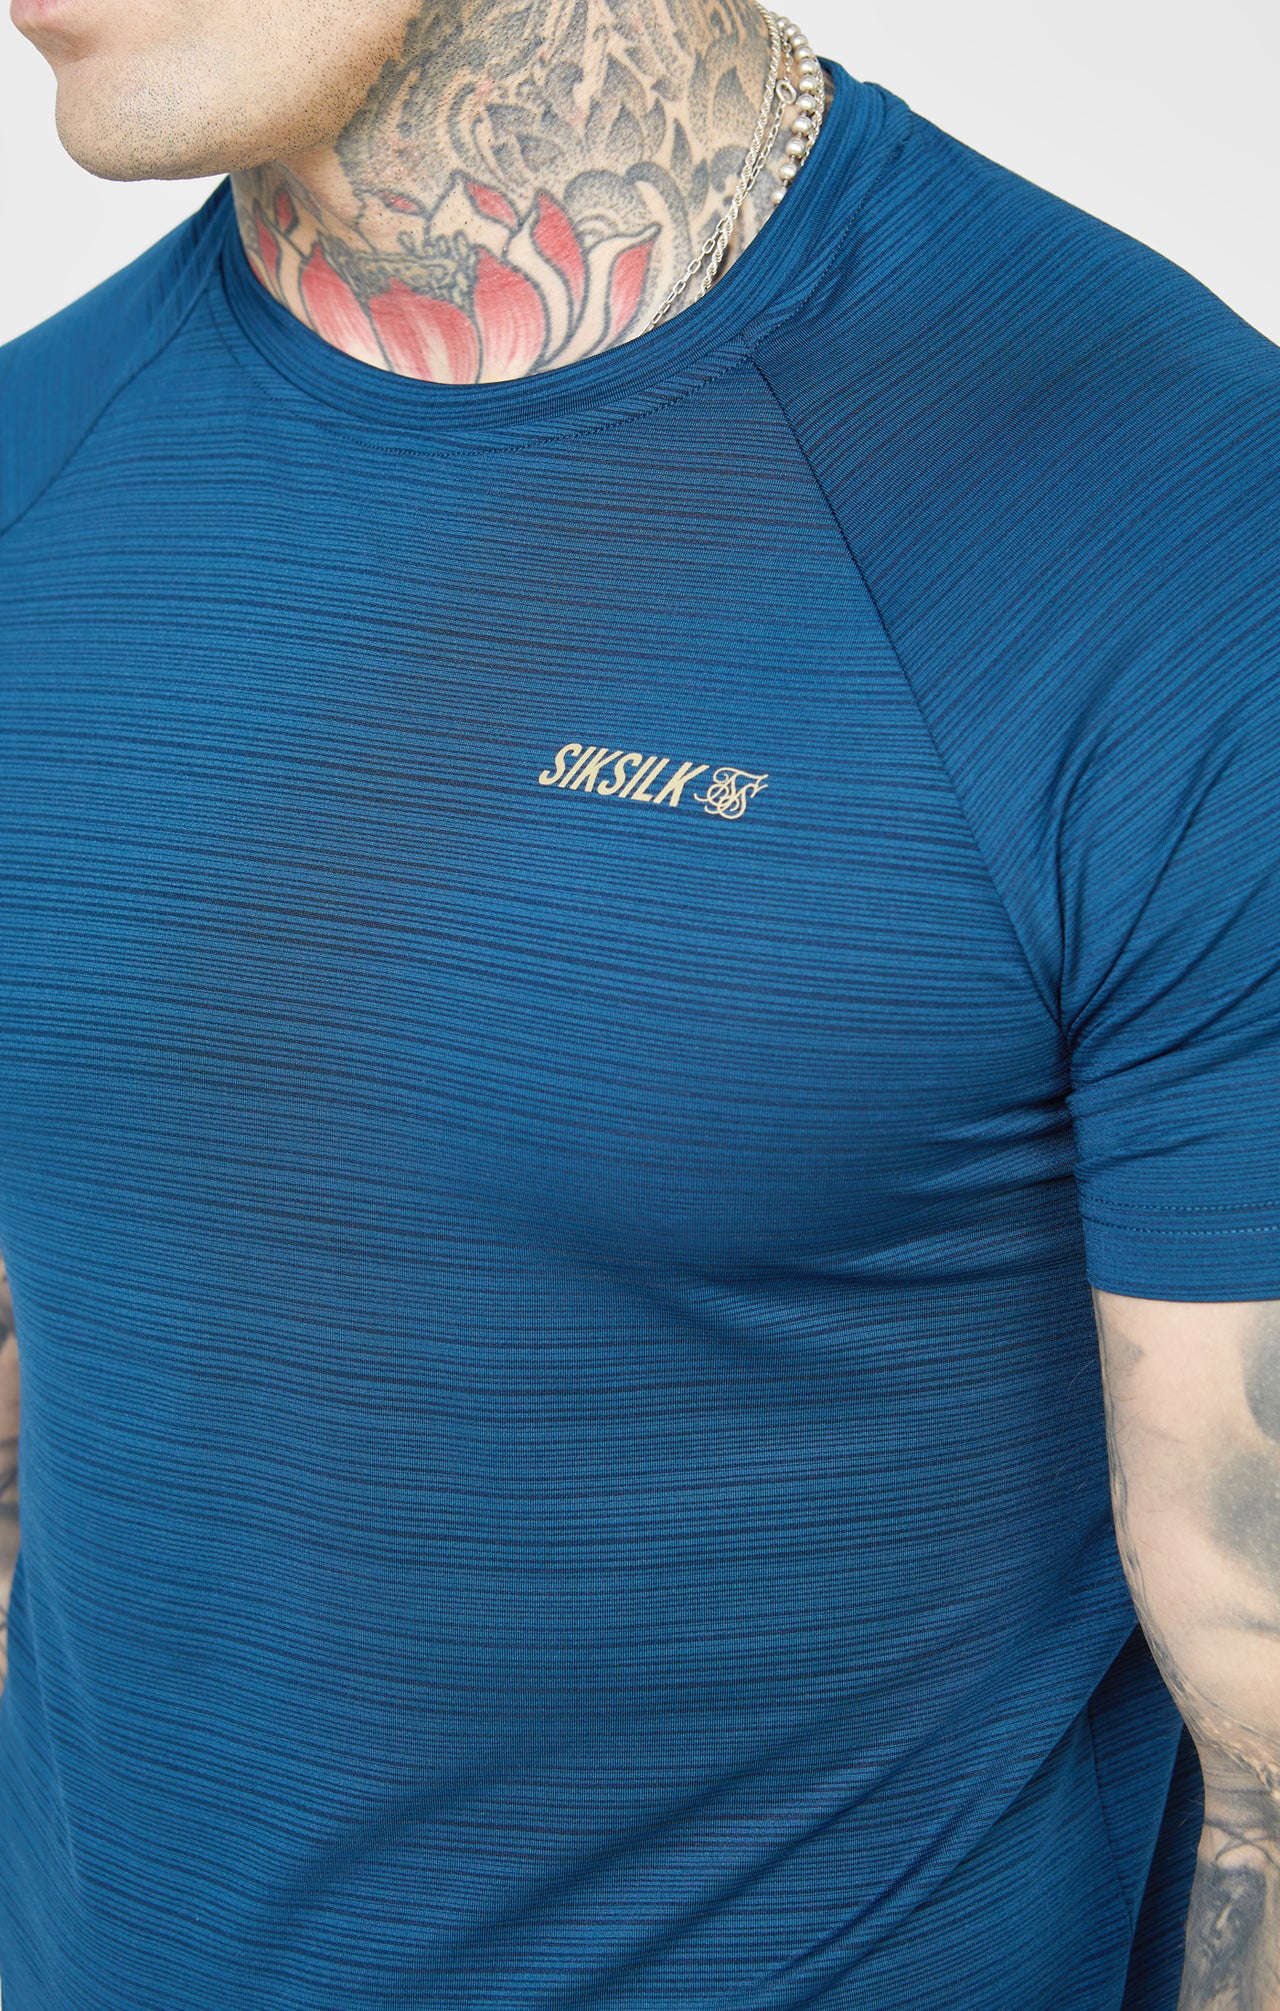 Teal Sports Textured Look T-Shirt (1)